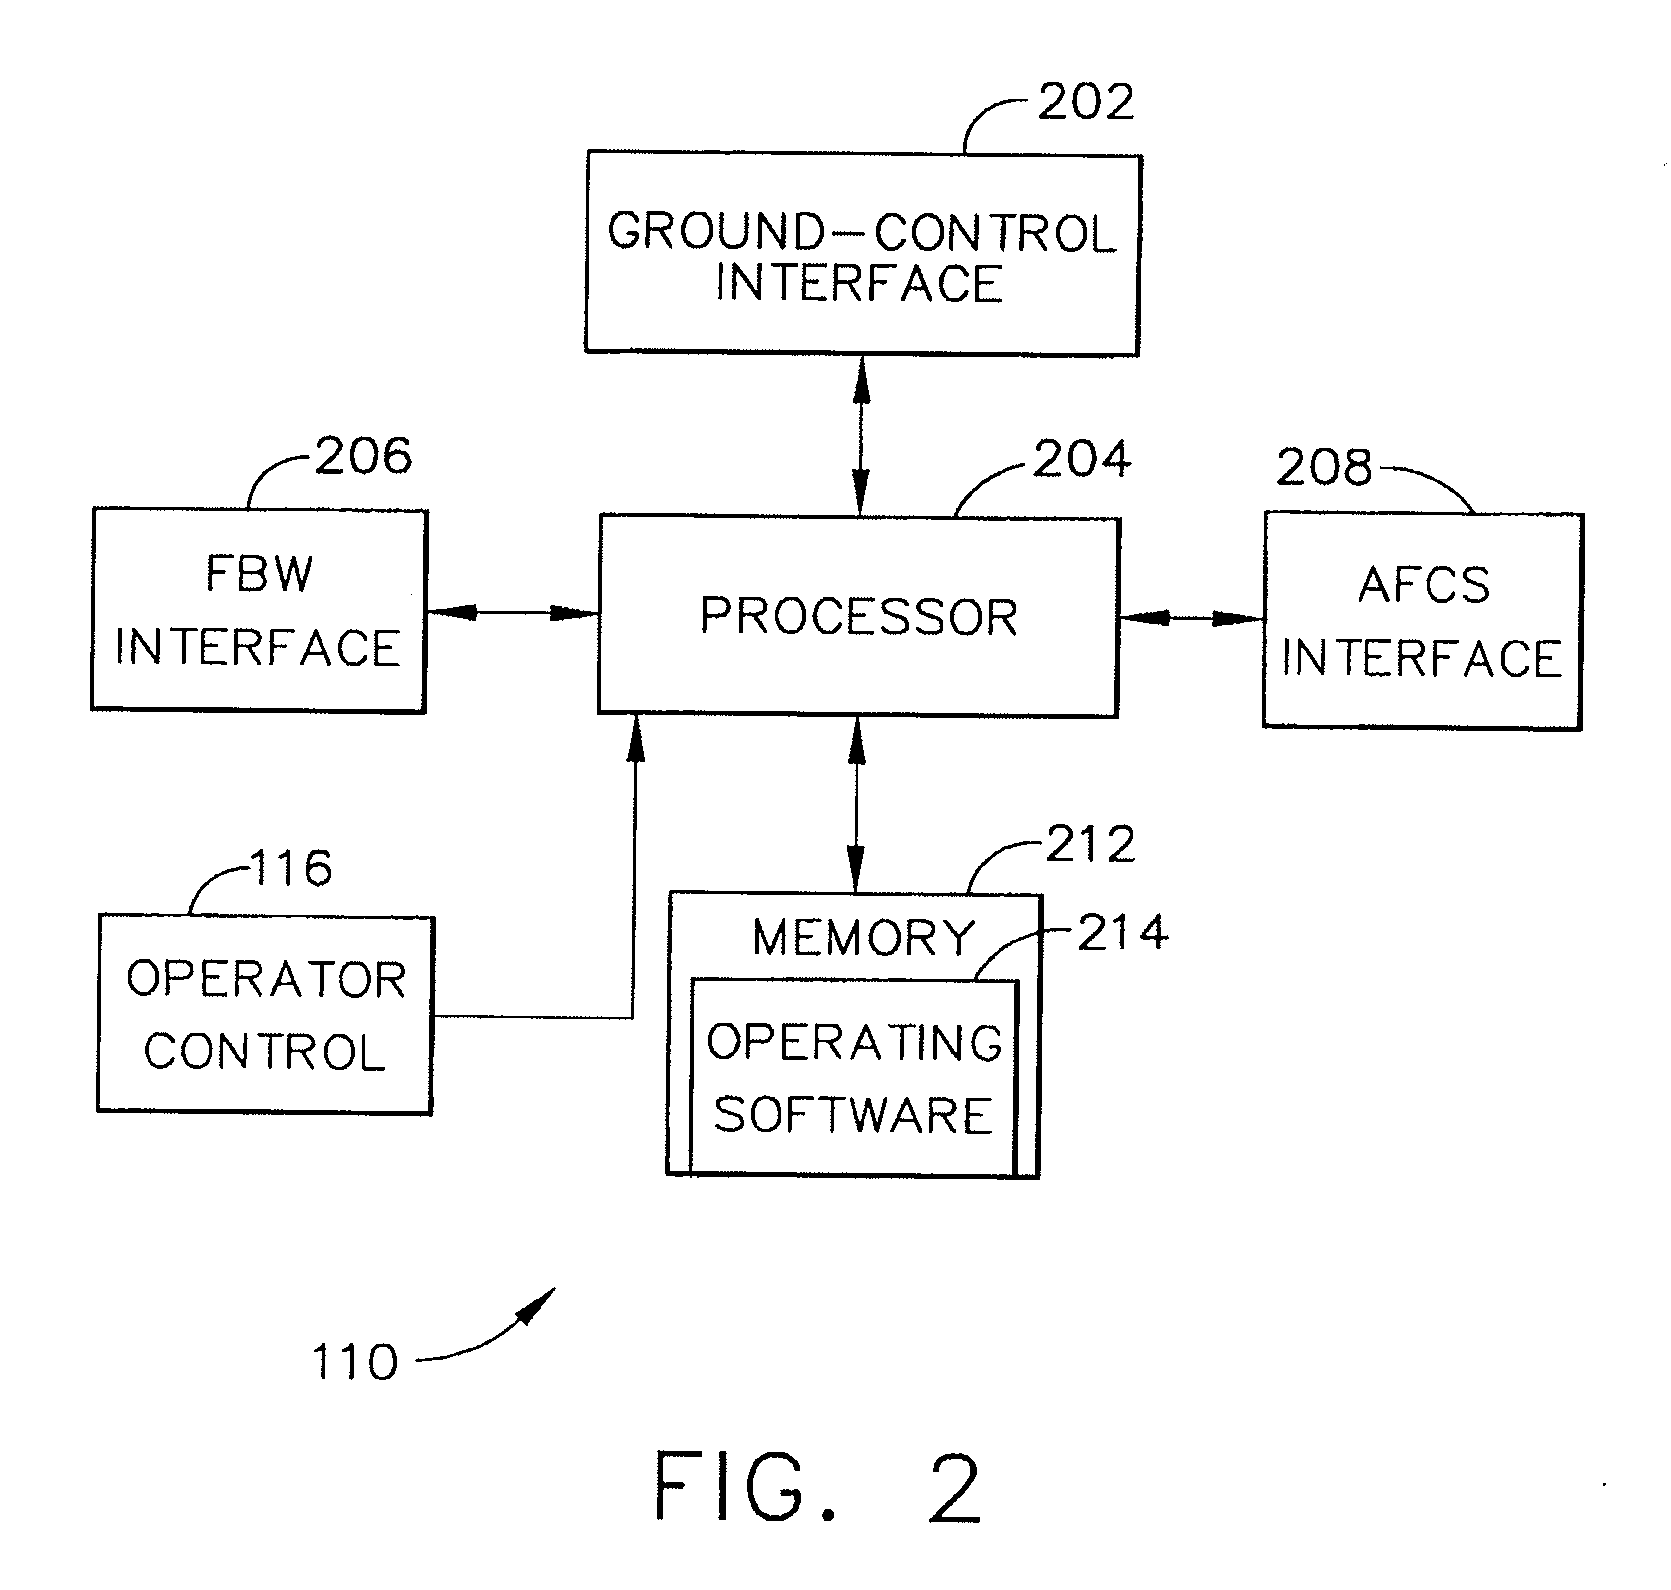 Method and apparatus for preventing an unauthorized flight of an aircraft